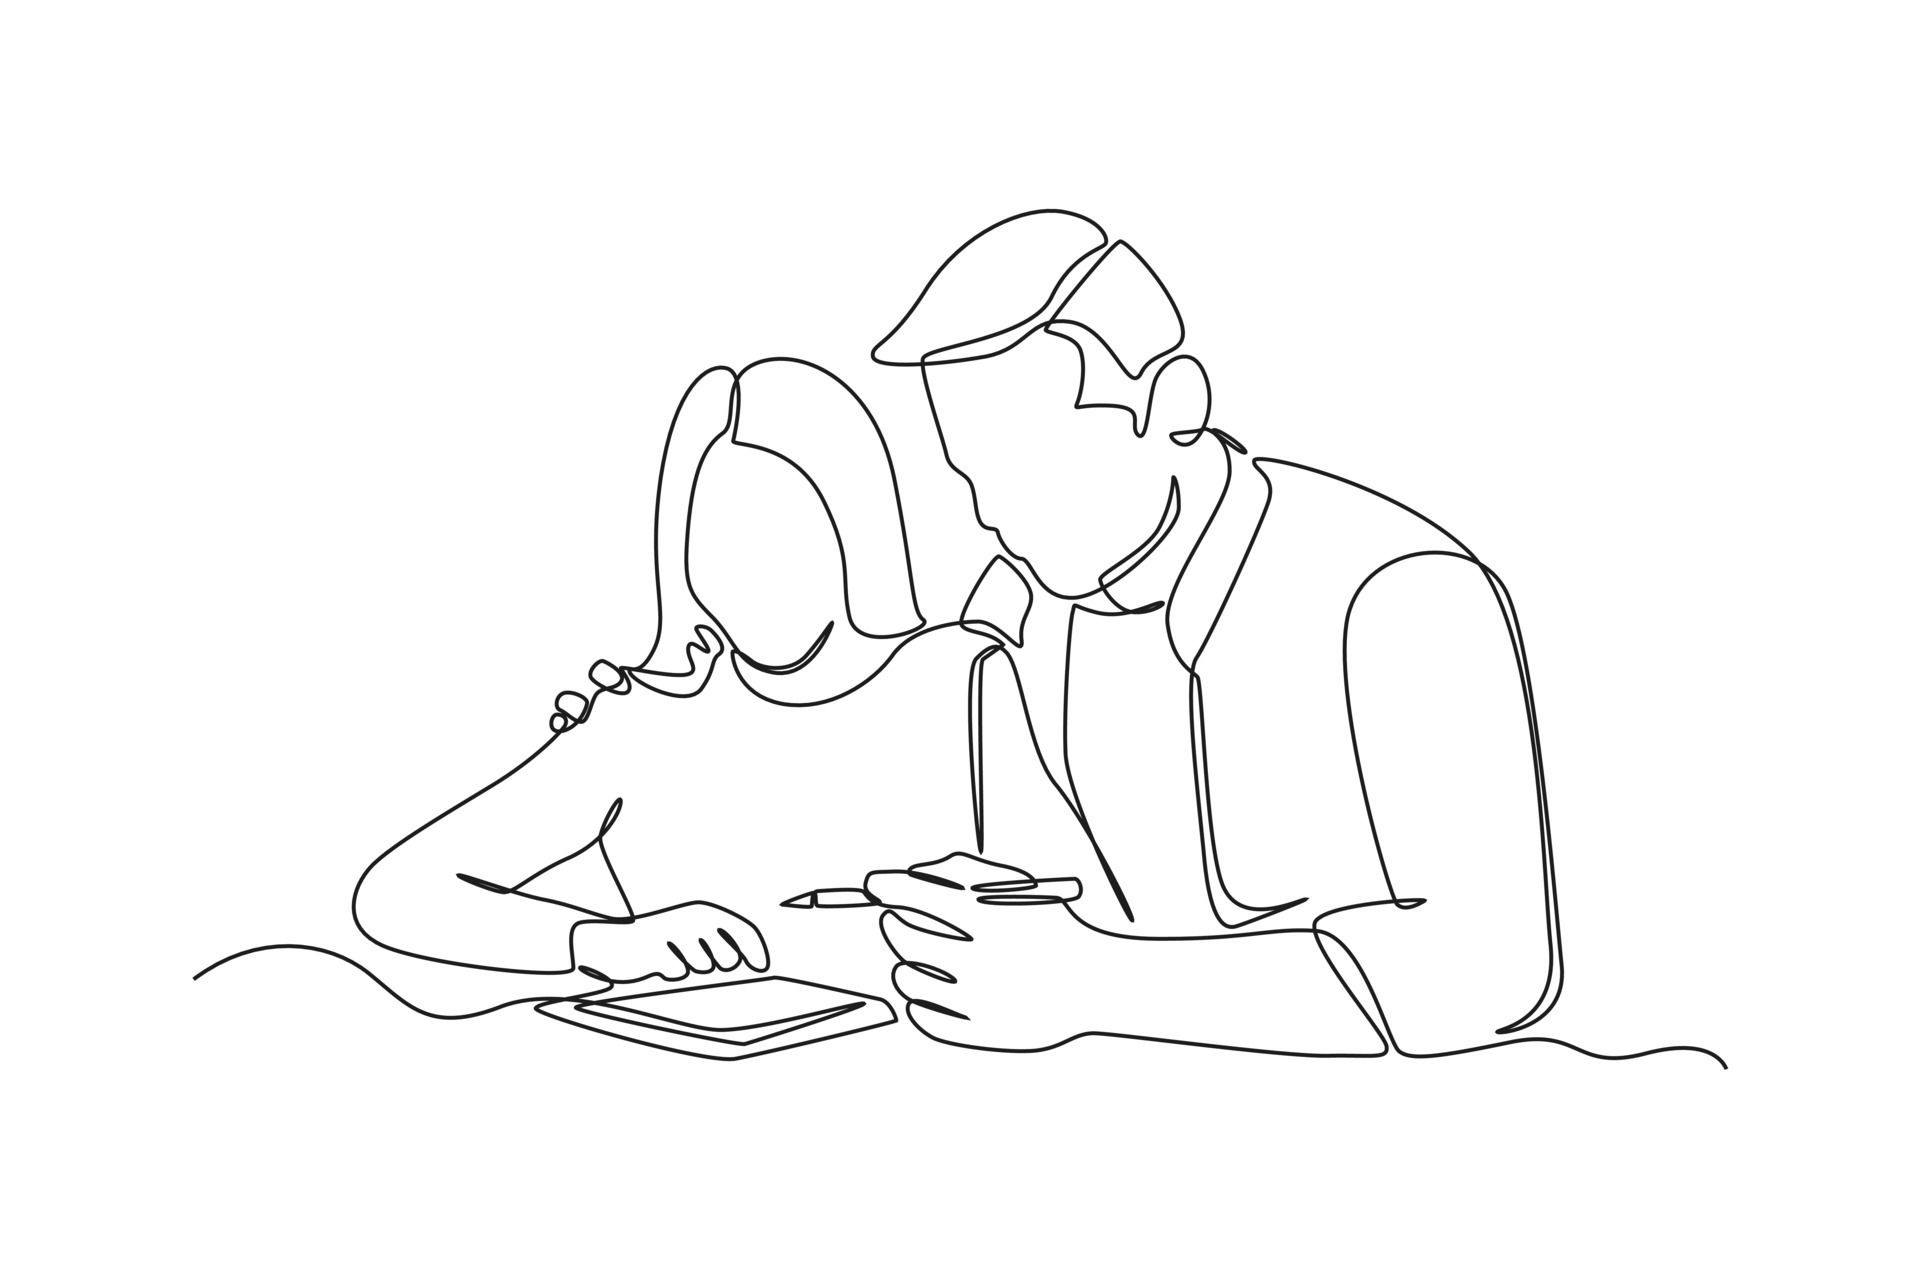 https://static.vecteezy.com/system/resources/previews/017/550/871/original/continuous-one-line-drawing-happy-father-teaches-her-daughter-studying-raising-teens-concept-single-line-draw-design-graphic-illustration-vector.jpg